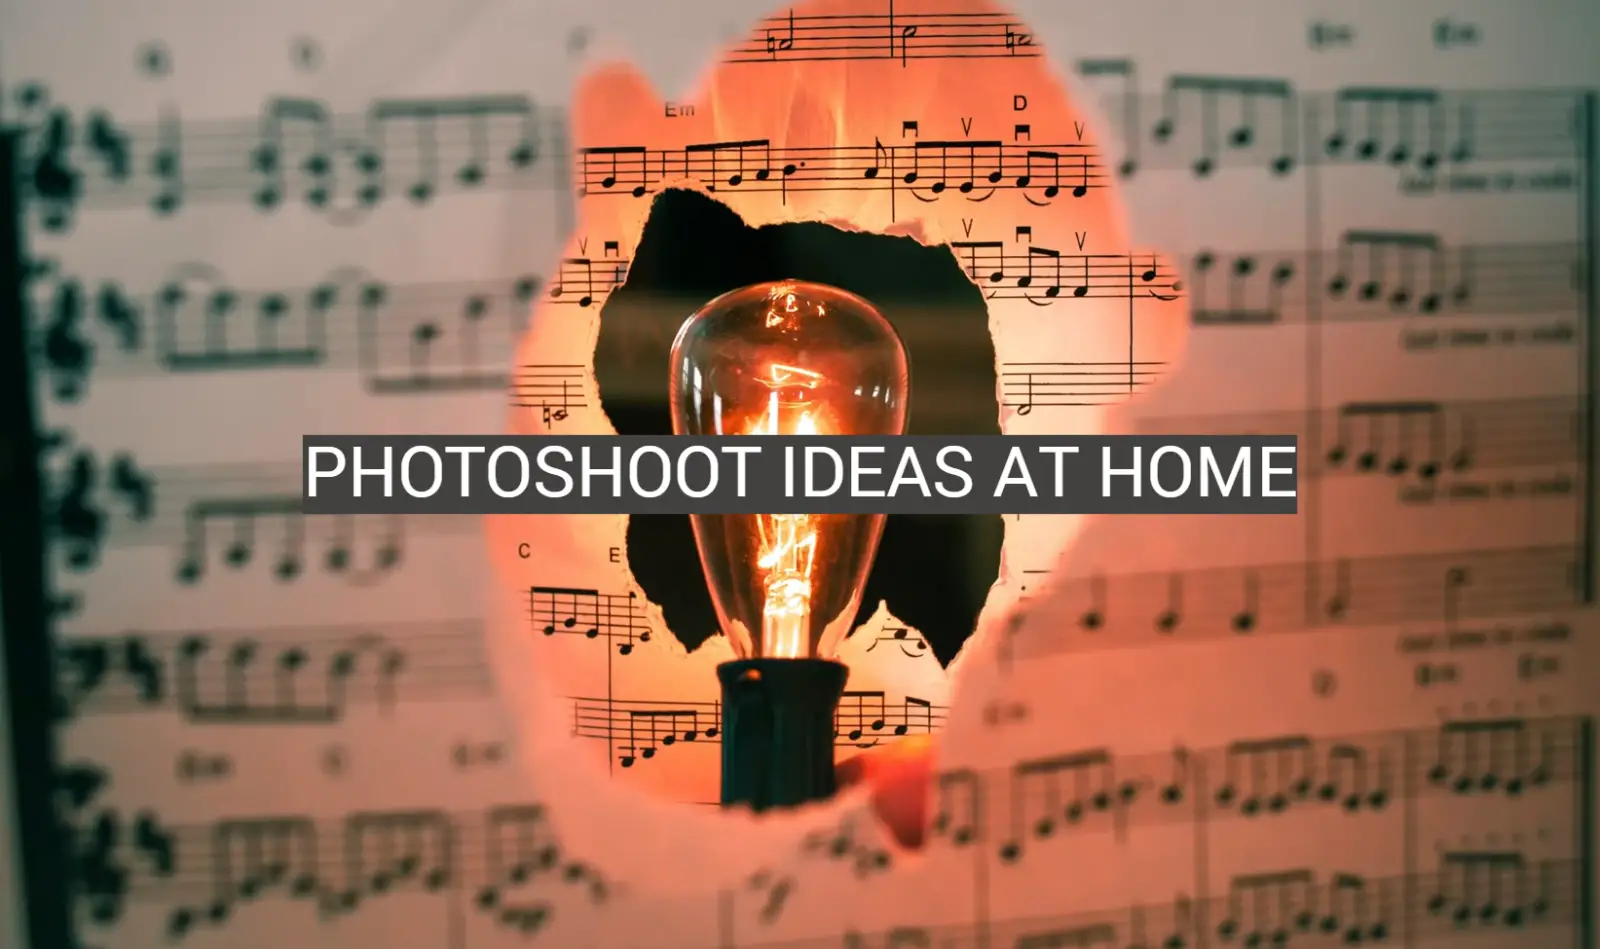 Photoshoot Ideas at Home